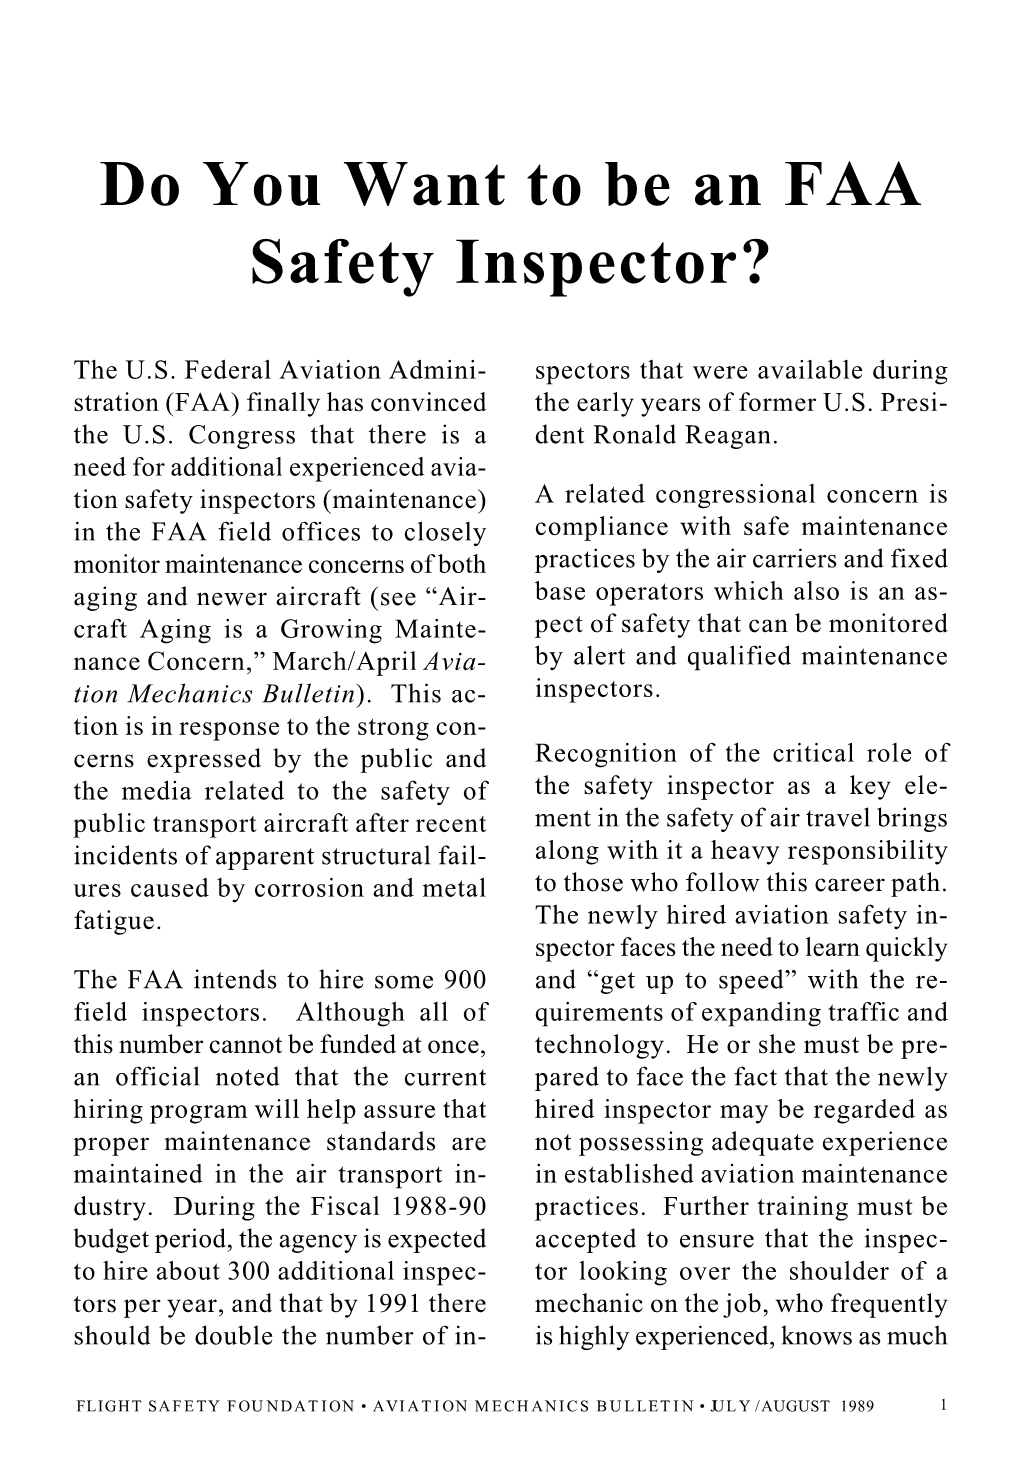 Do You Want to Be an FAA Safety Inspector?